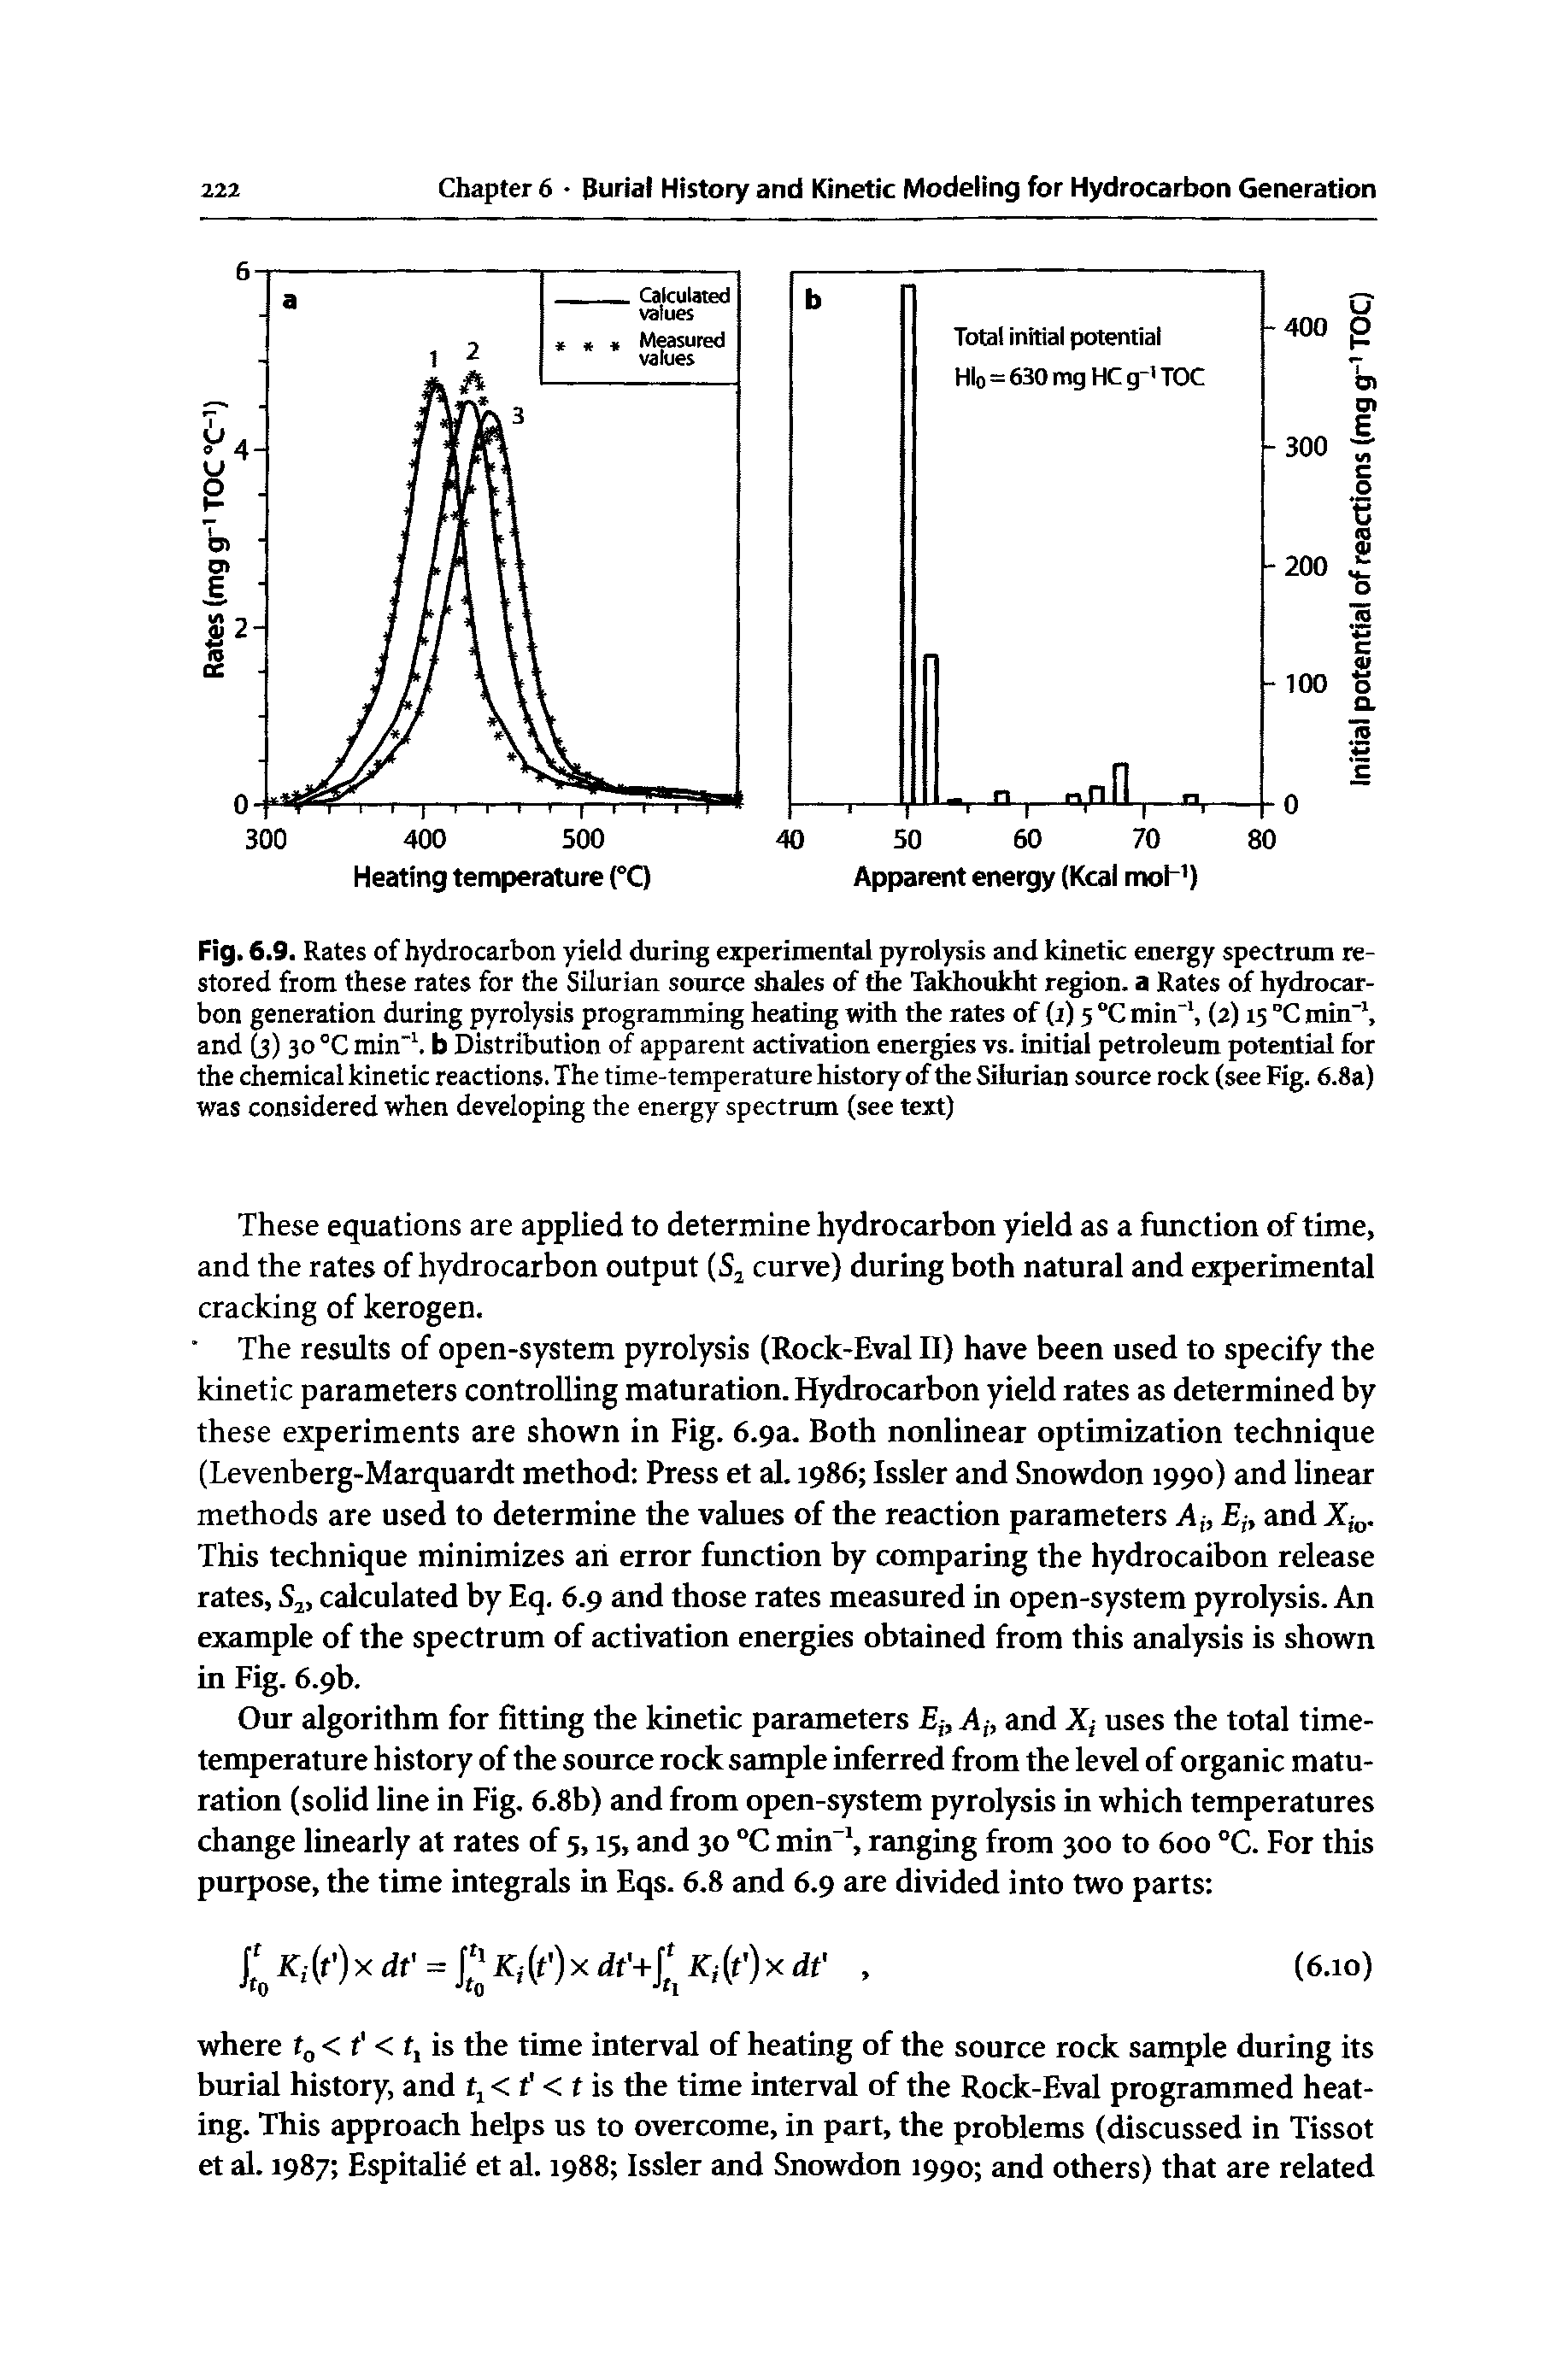 Fig. 6.9. Rates of hydrocarbon yield during experimental pyrolysis and kinetic energy spectrum restored from these rates for the Silurian source shales of the Takhoukht region, a Rates of hydrocarbon generation during pyrolysis programming heating with the rates of (i) 5 C min", (2) 15 °C min", and (3) 30 °C min" . b Distribution of apparent activation energies vs. initial petroleum potential for the chemical kinetic reactions. The time-temperature history of the Silurian source rock (see Fig. 6.8a) was considered when developing the energy spectrum (see text)...